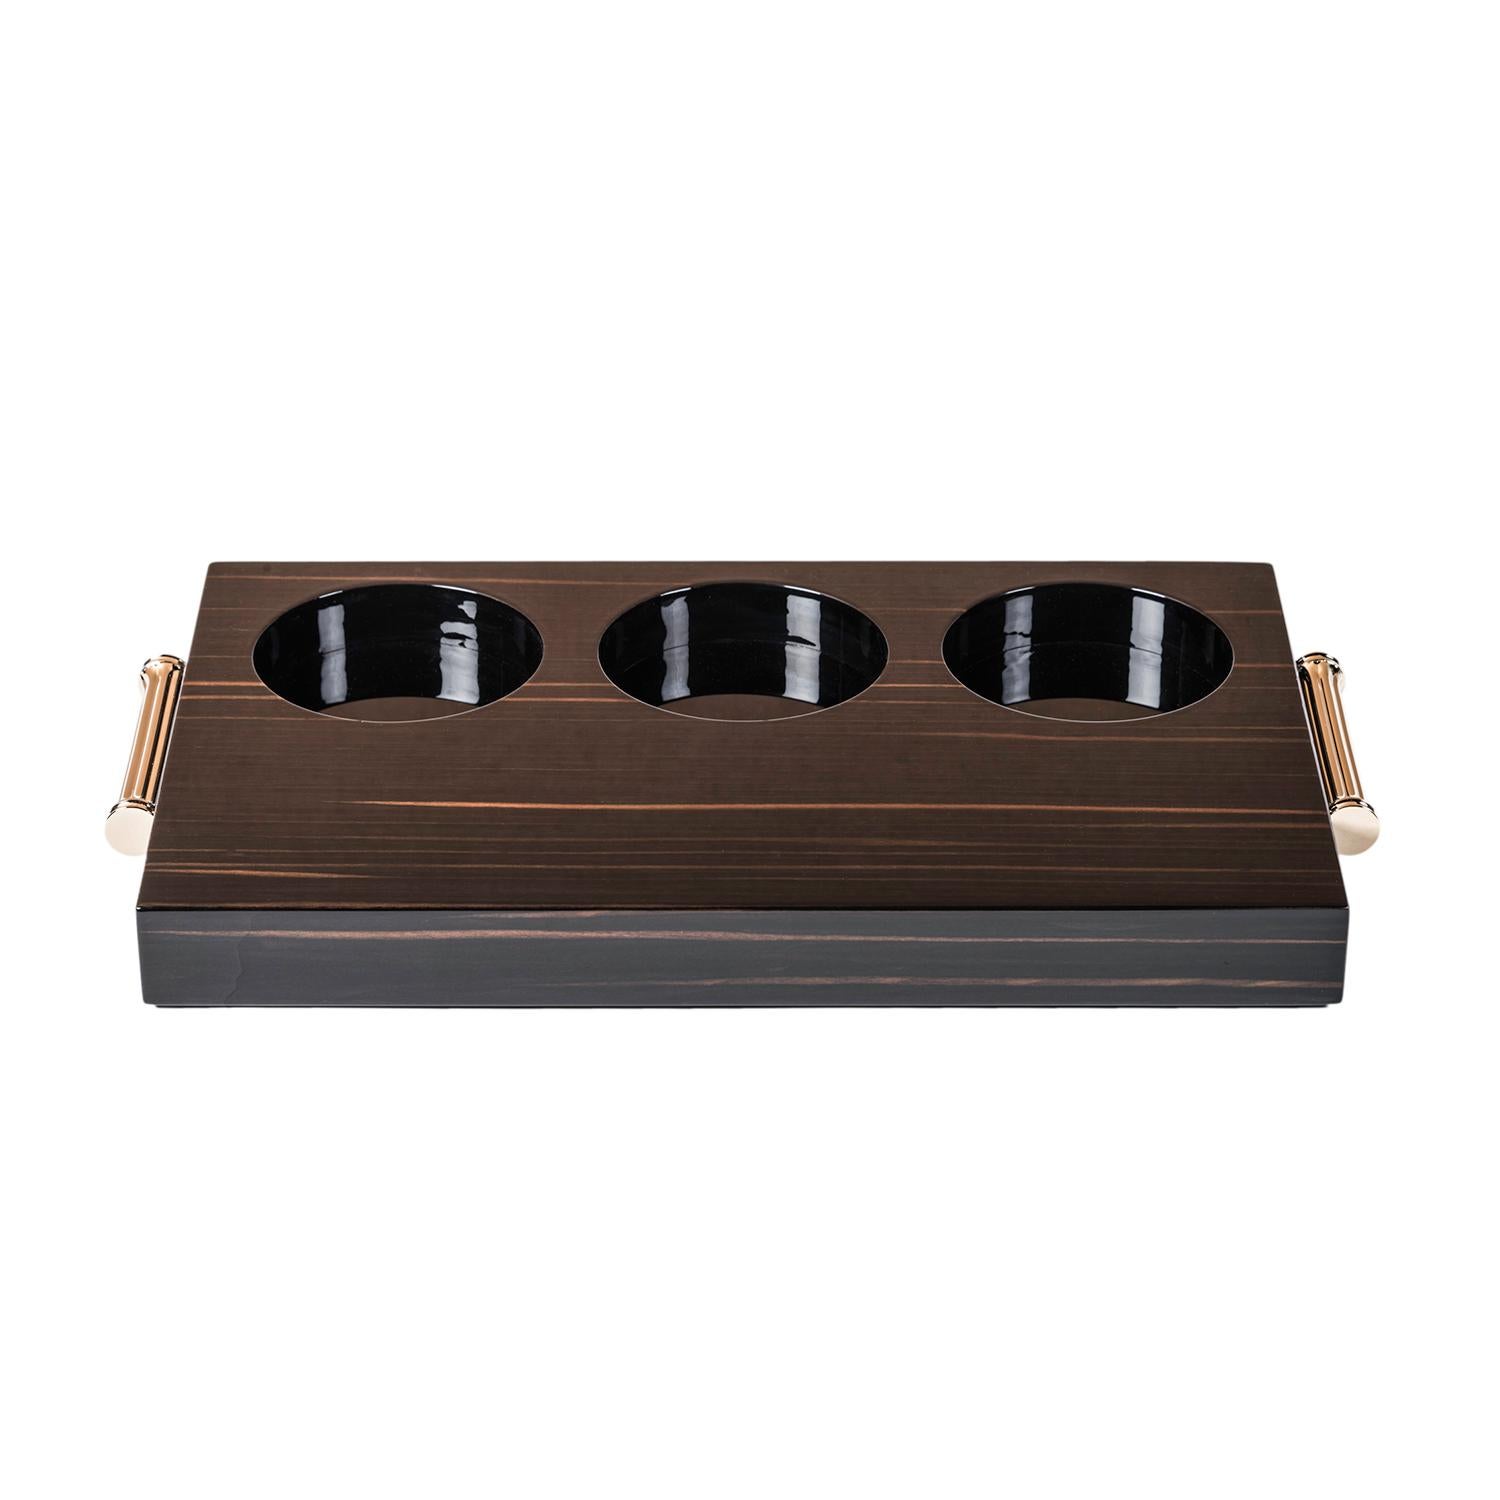 Tray in Macassar ebony veneer with gloss finish. 24-karat gold plated brass handles.

Overall dimensions: W 35 x D 20 x H 3 cm.